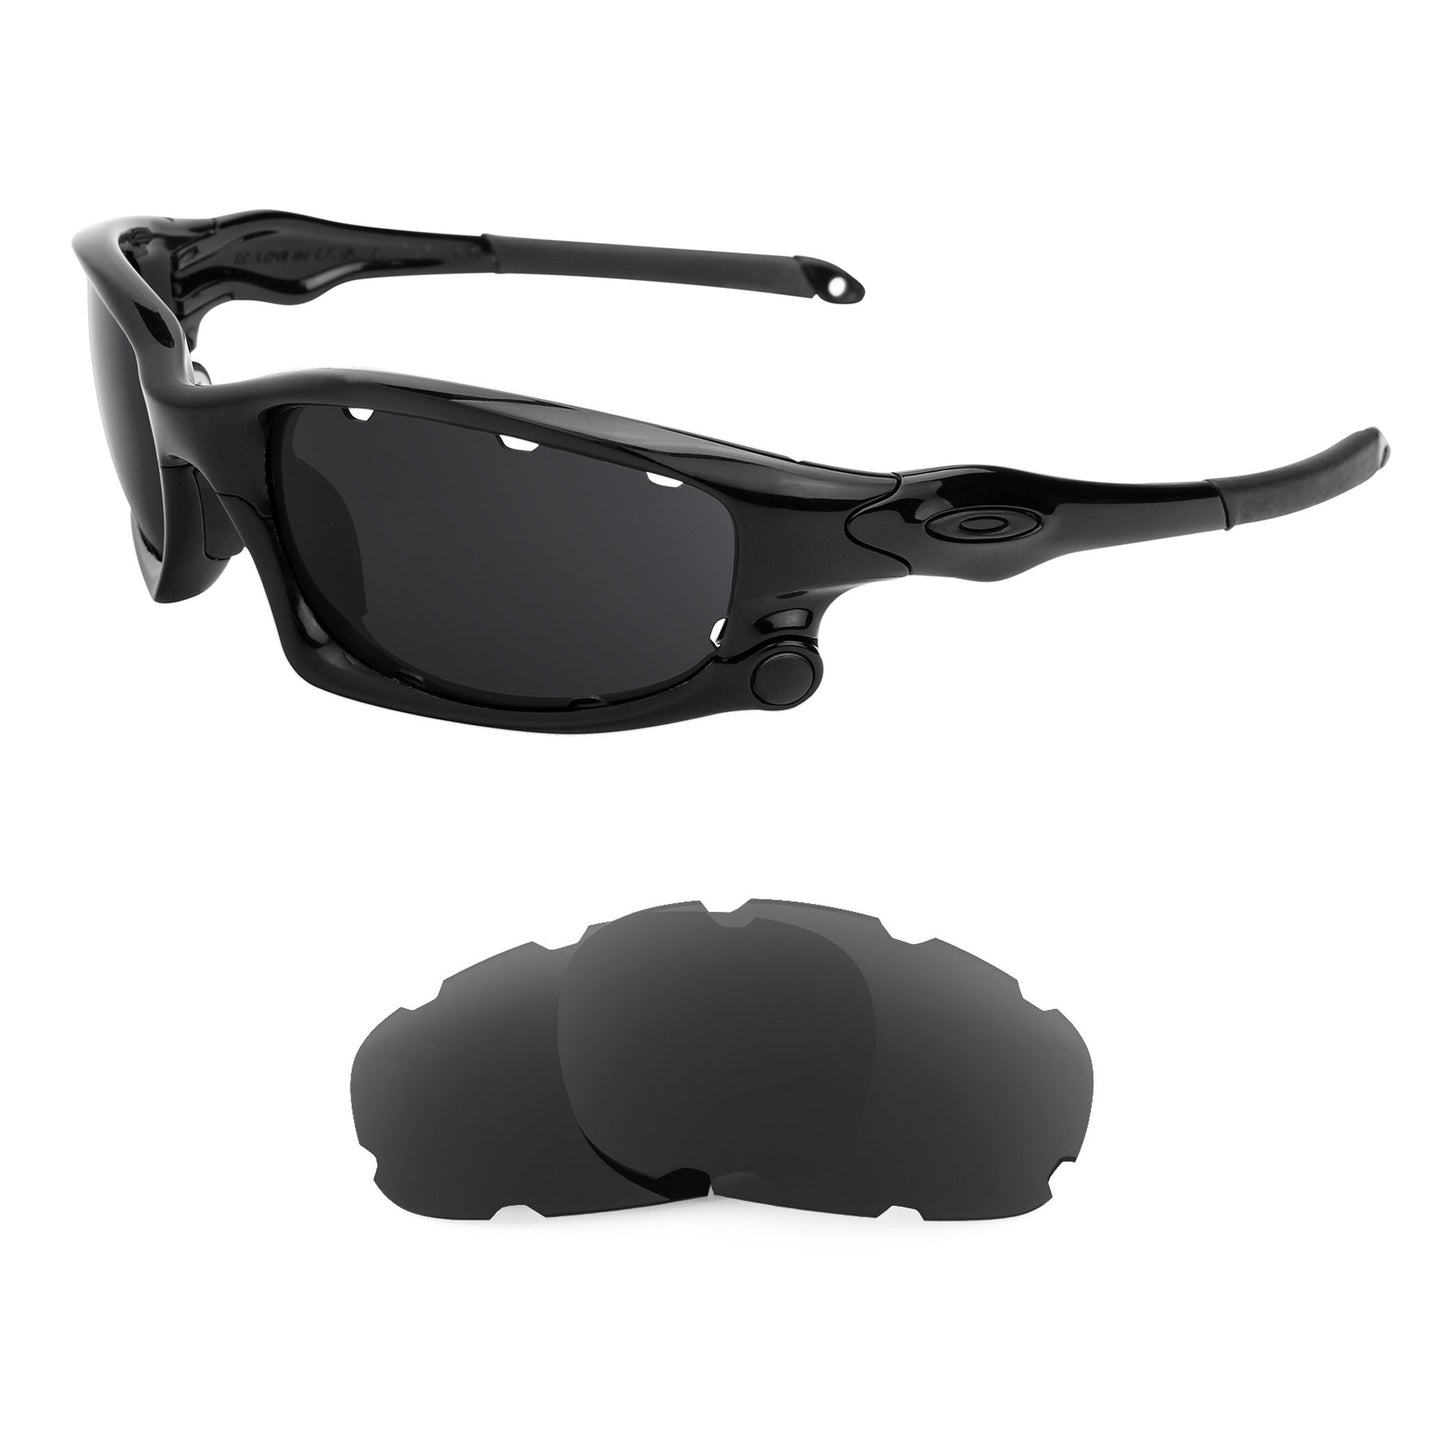 Oakley Wind Jacket Vented (Low Bridge Fit) sunglasses with replacement lenses